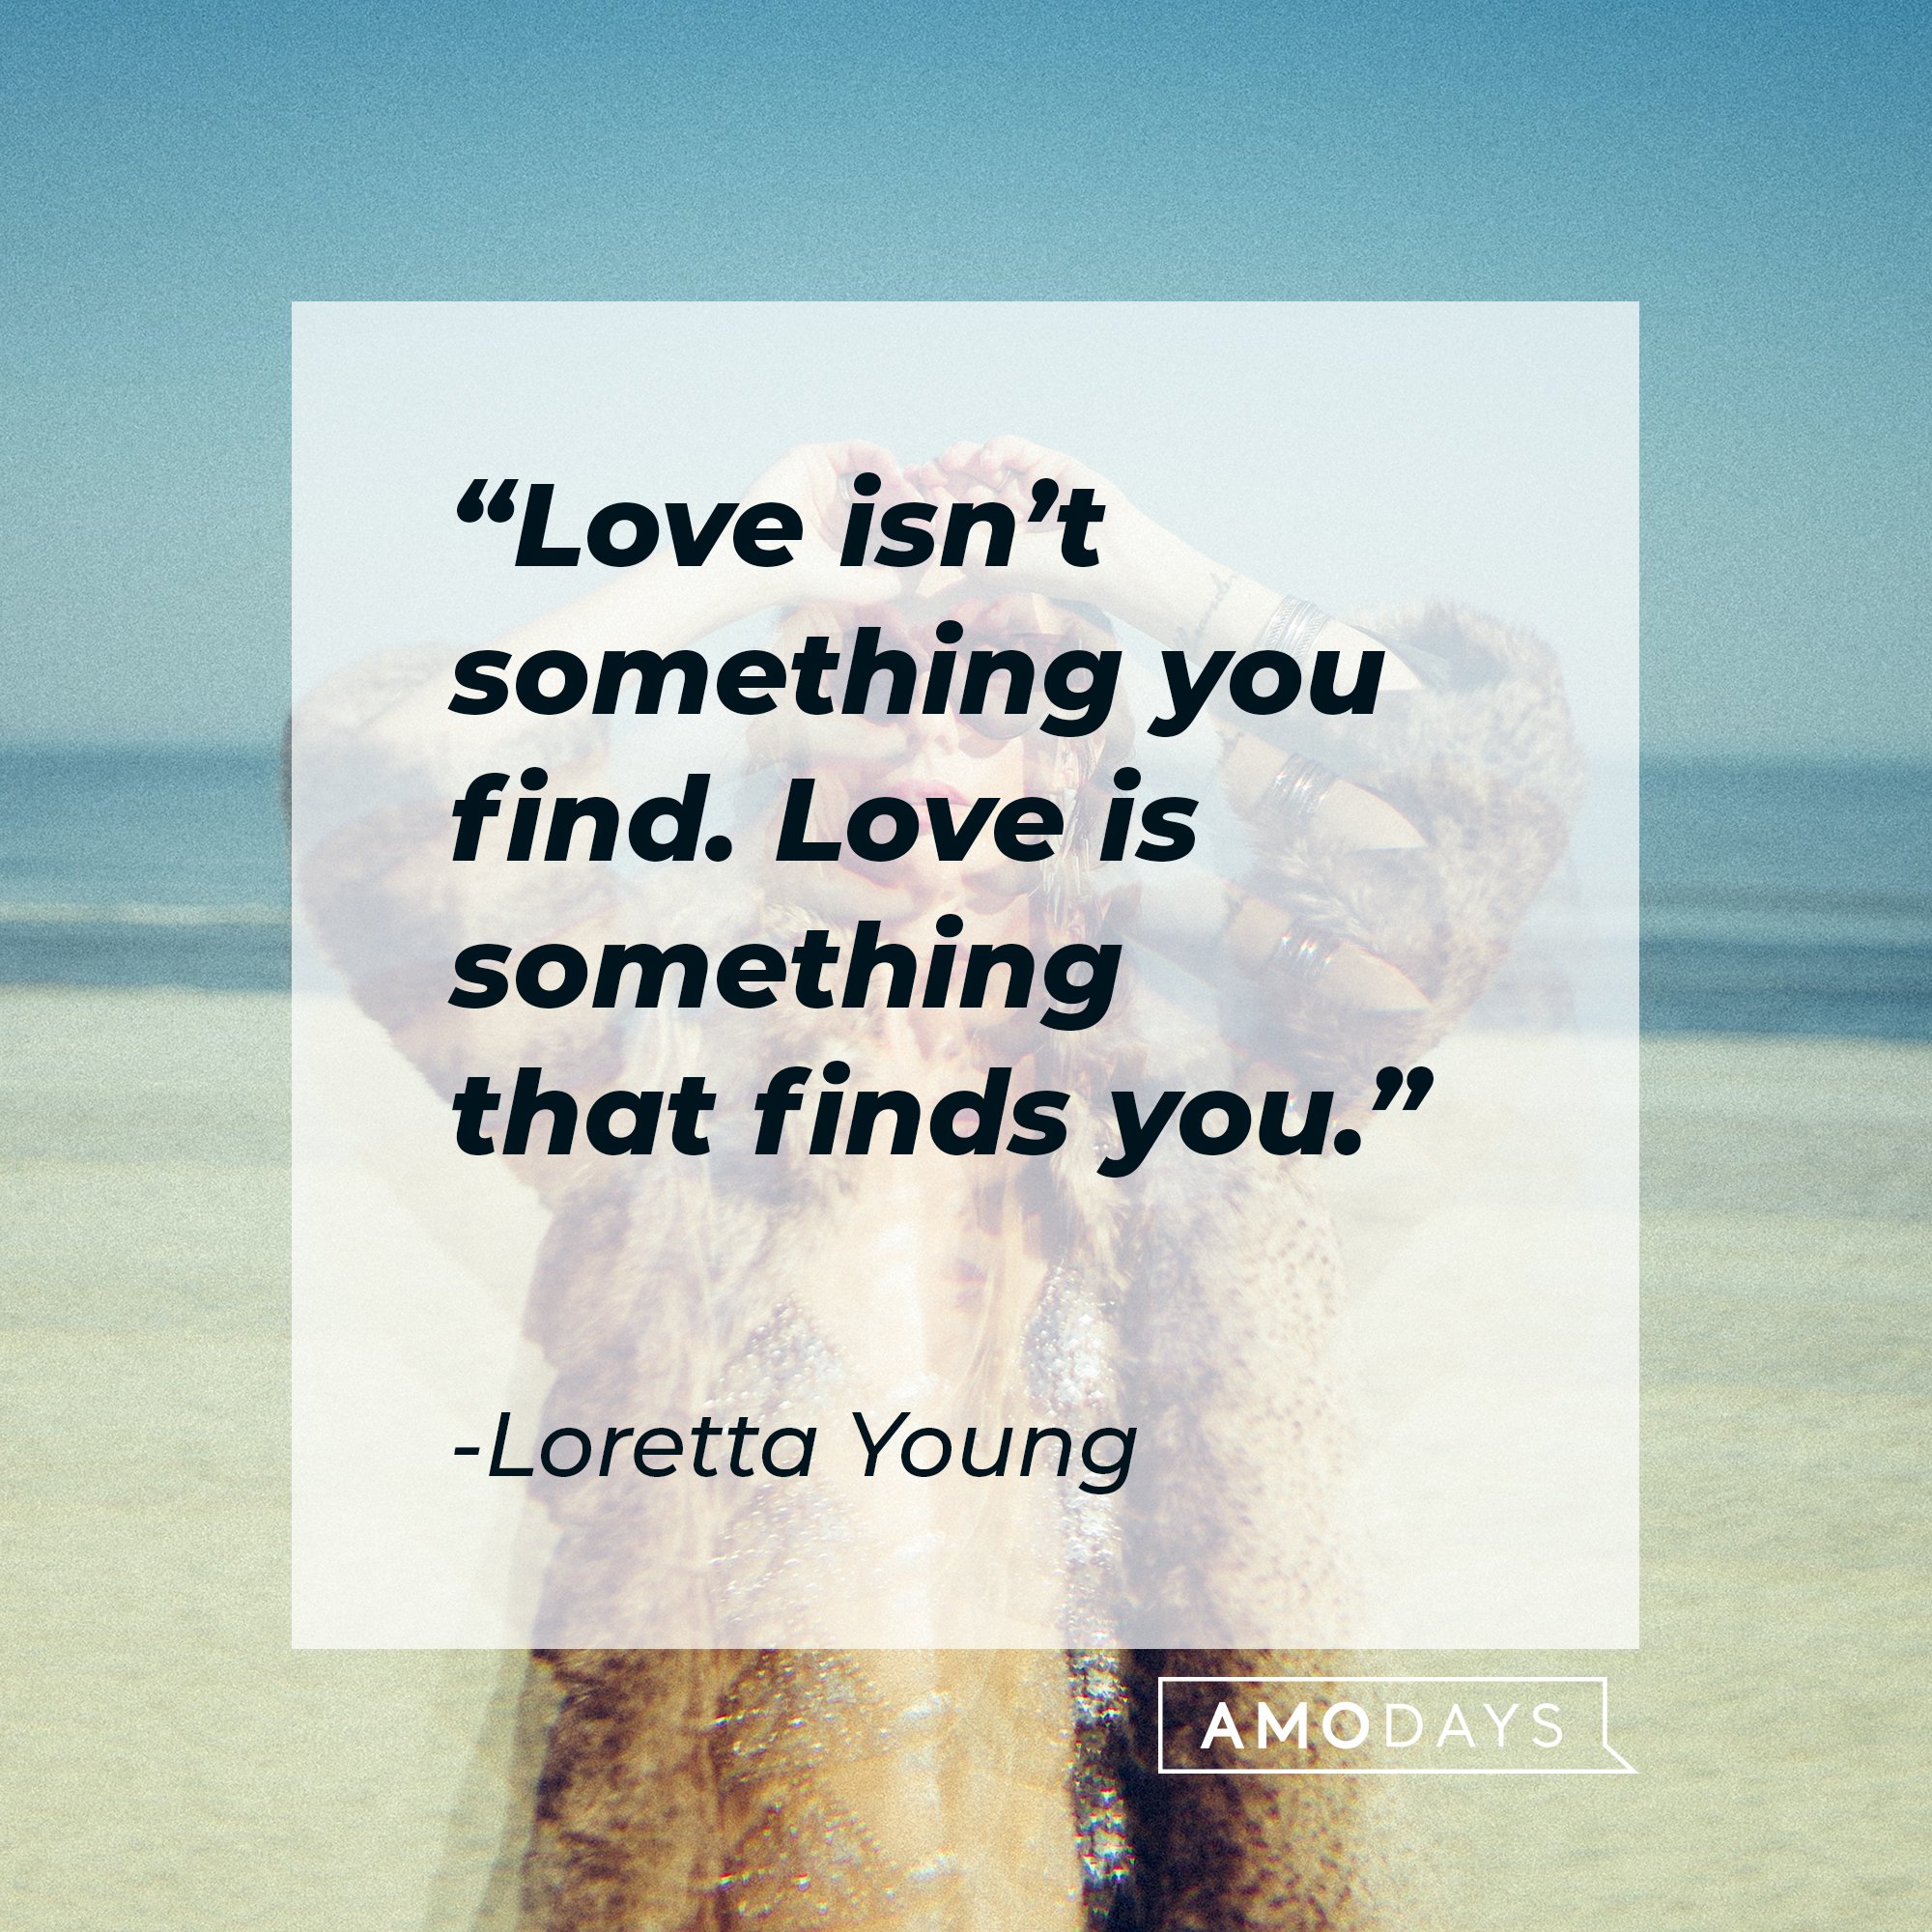 Loretta Young's quote: “Love isn’t something you find. Love is something that finds you.” | Image: AmoDays